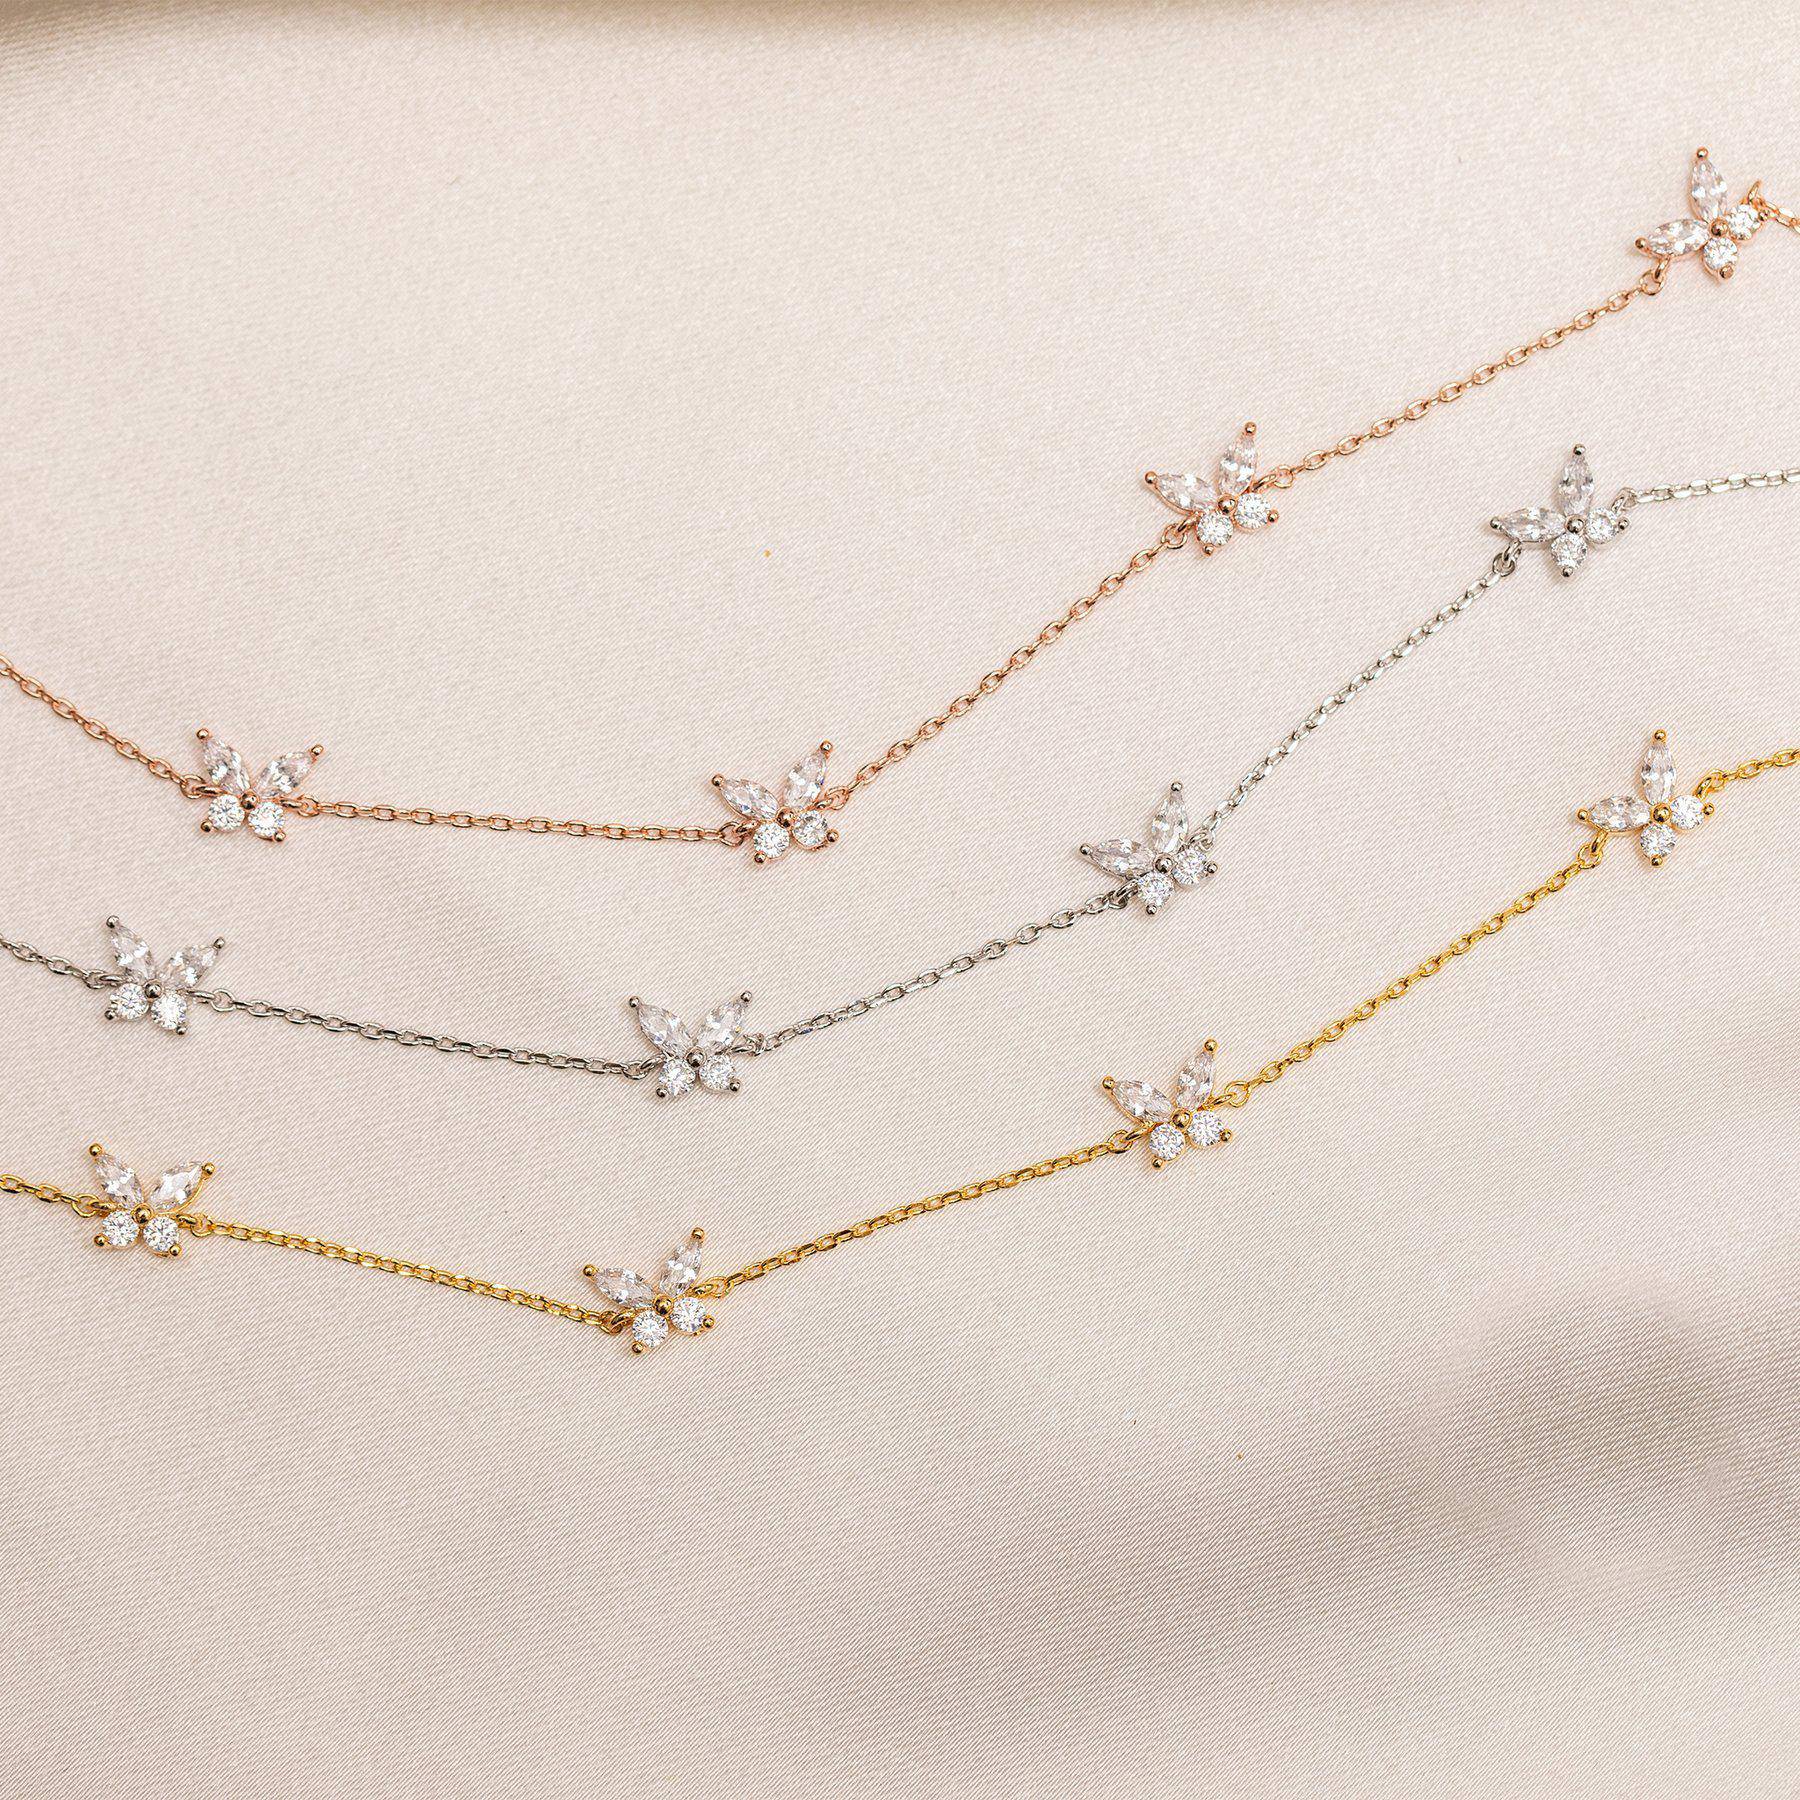 Born to Fly Anklet - Gold - Twinkle Twinkle Little One